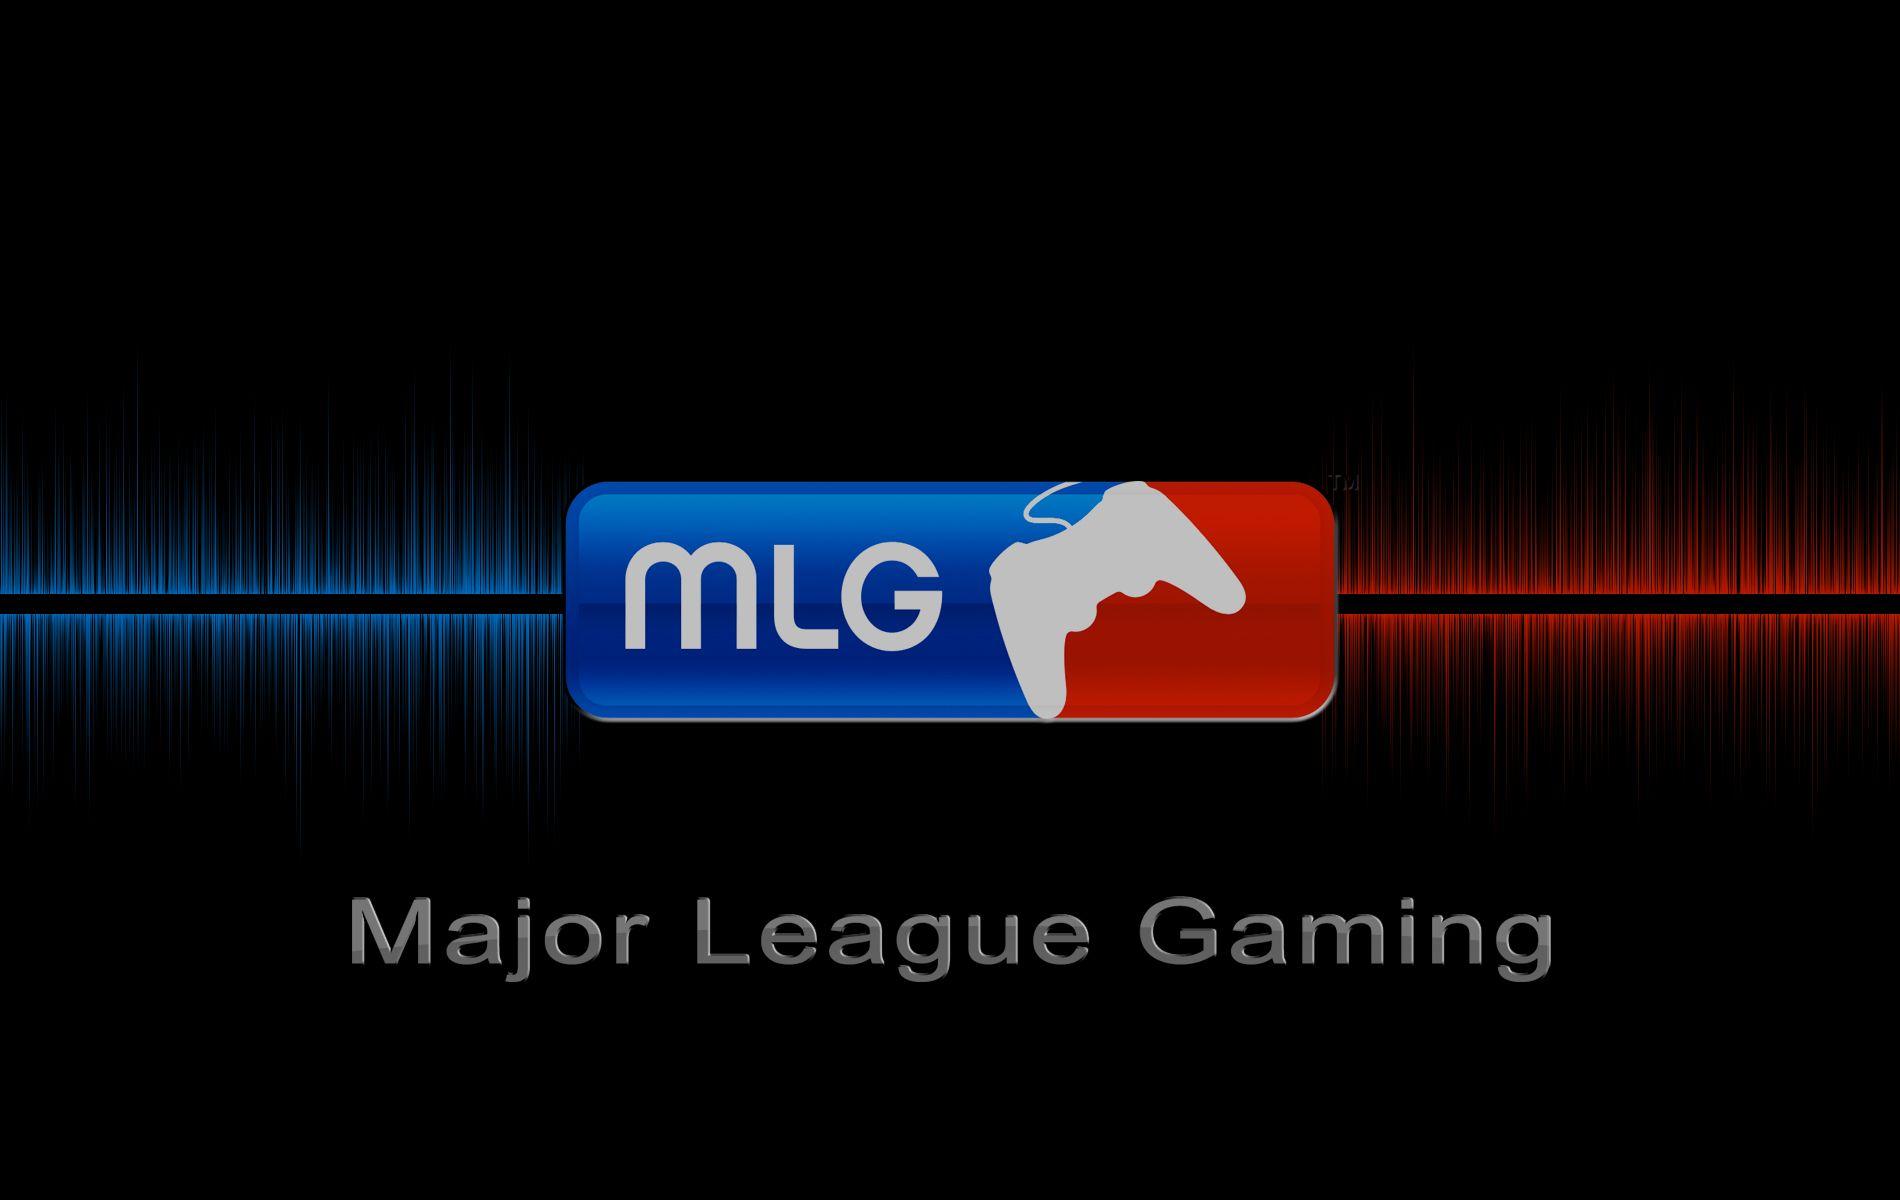 Activision Blizzard Purchases Major League Gaming